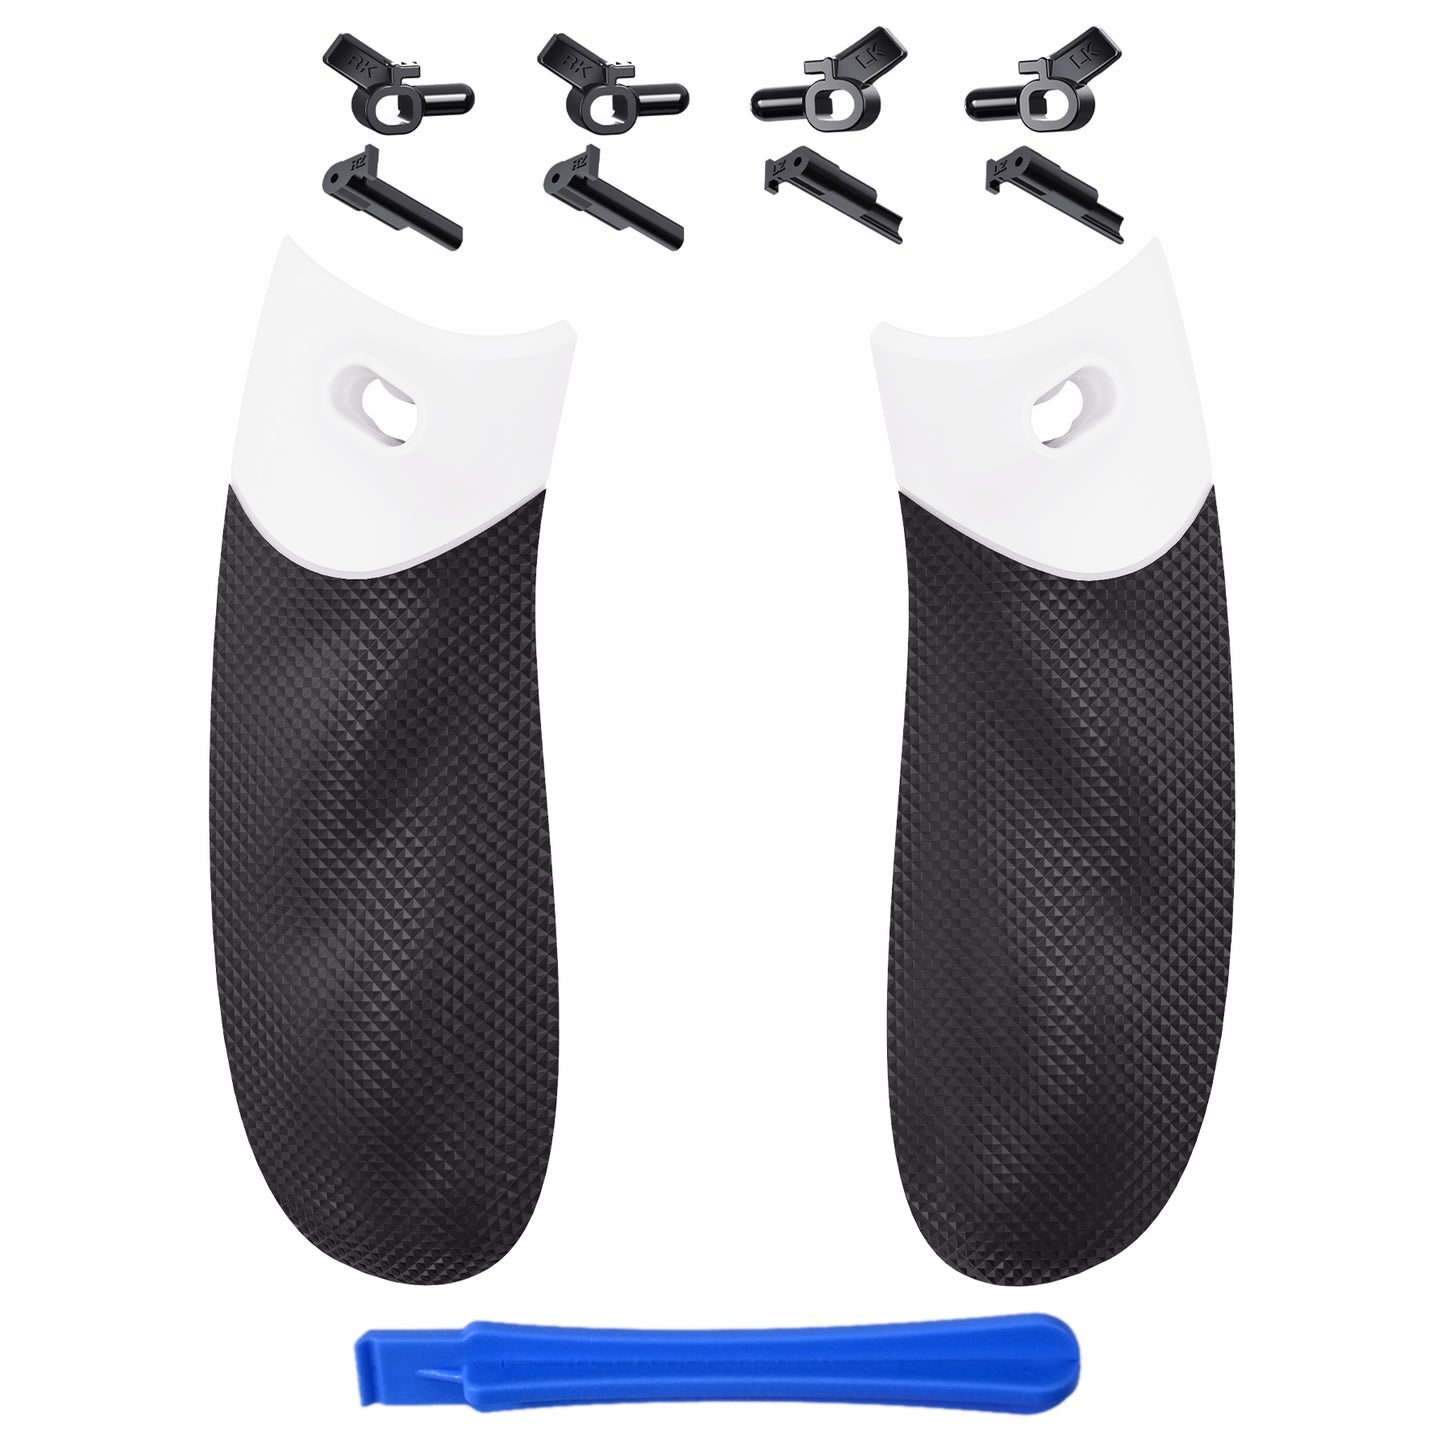 eXtremeRate Retail White FLEXOR Rubberized Side Rails Grips Trigger Stop Kit for Xbox Series X/S Controller, Anti-Slip Ergonomic Trigger Stopper Handle Grips for Xbox Core Controller - Diamond Textured - PX3Q3004